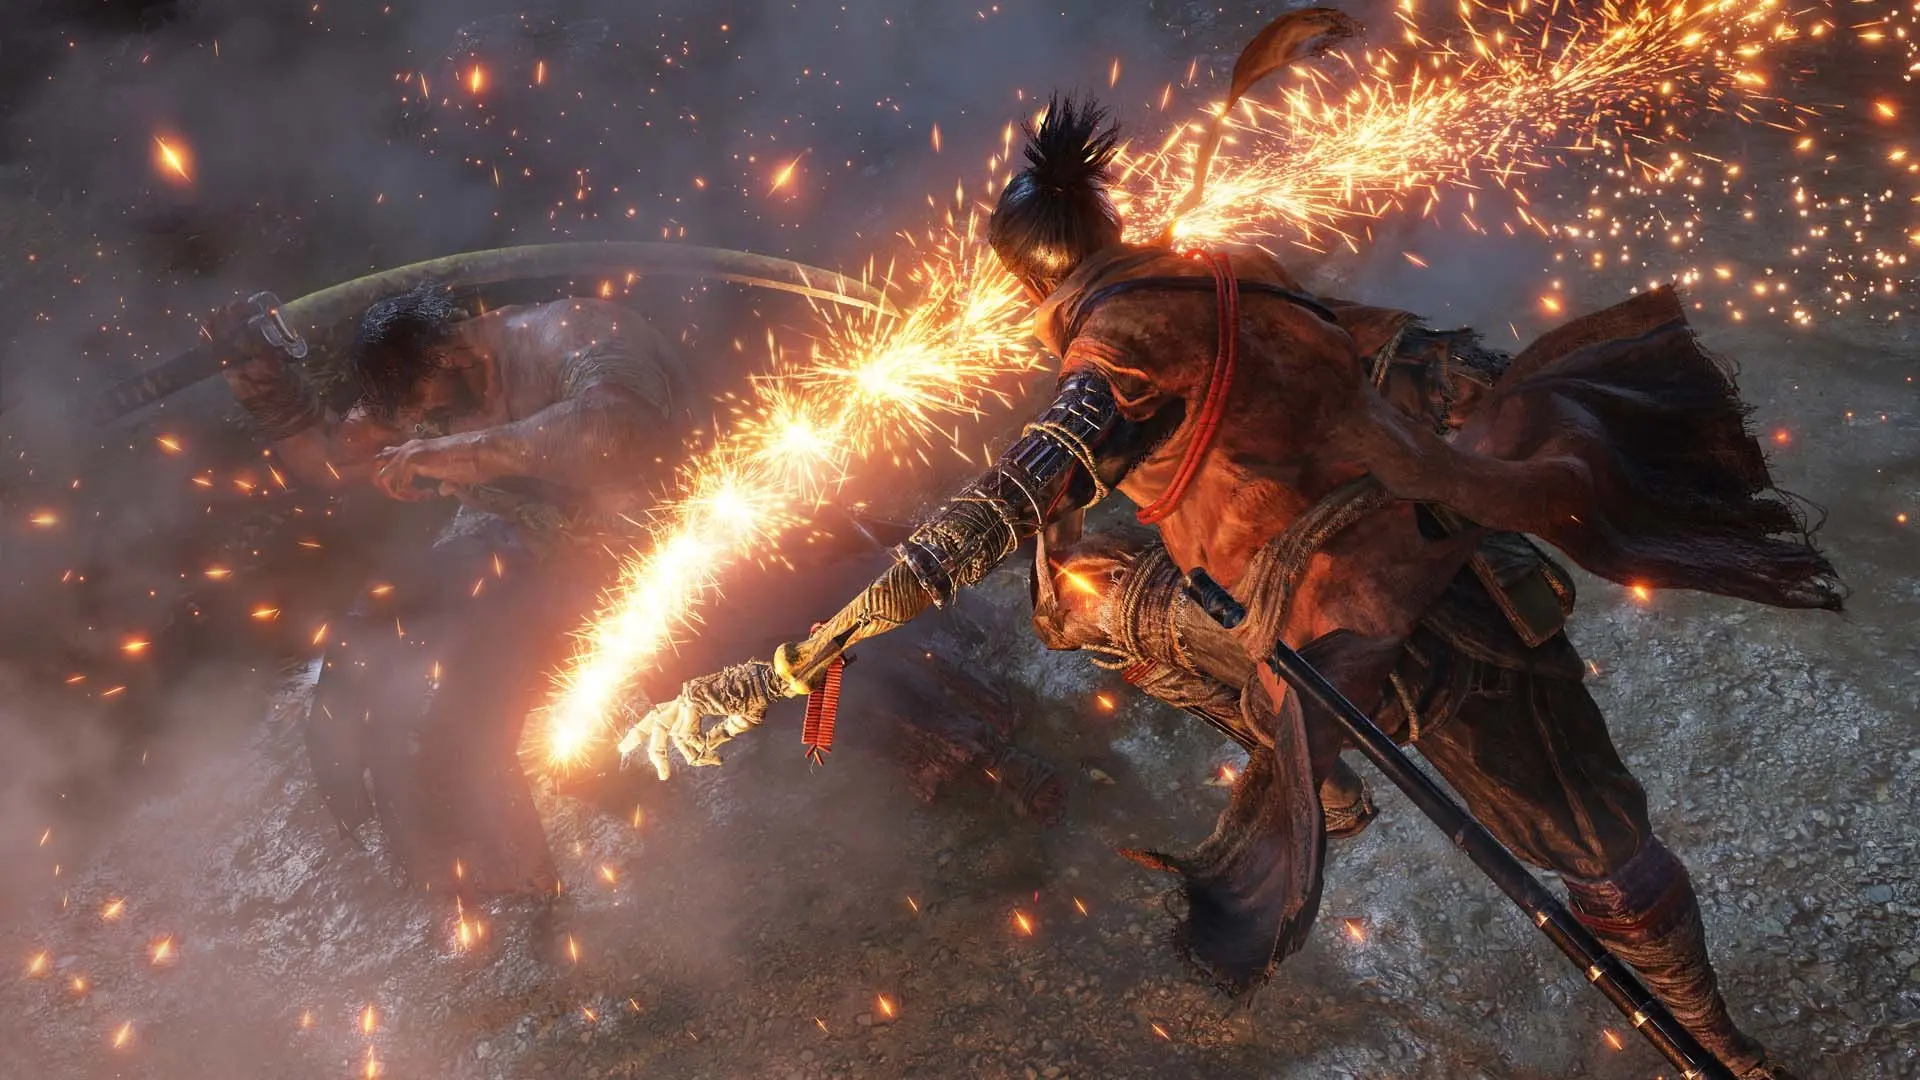 Sekiro: Shadows Die Twice – a new trailer is published just days before the release